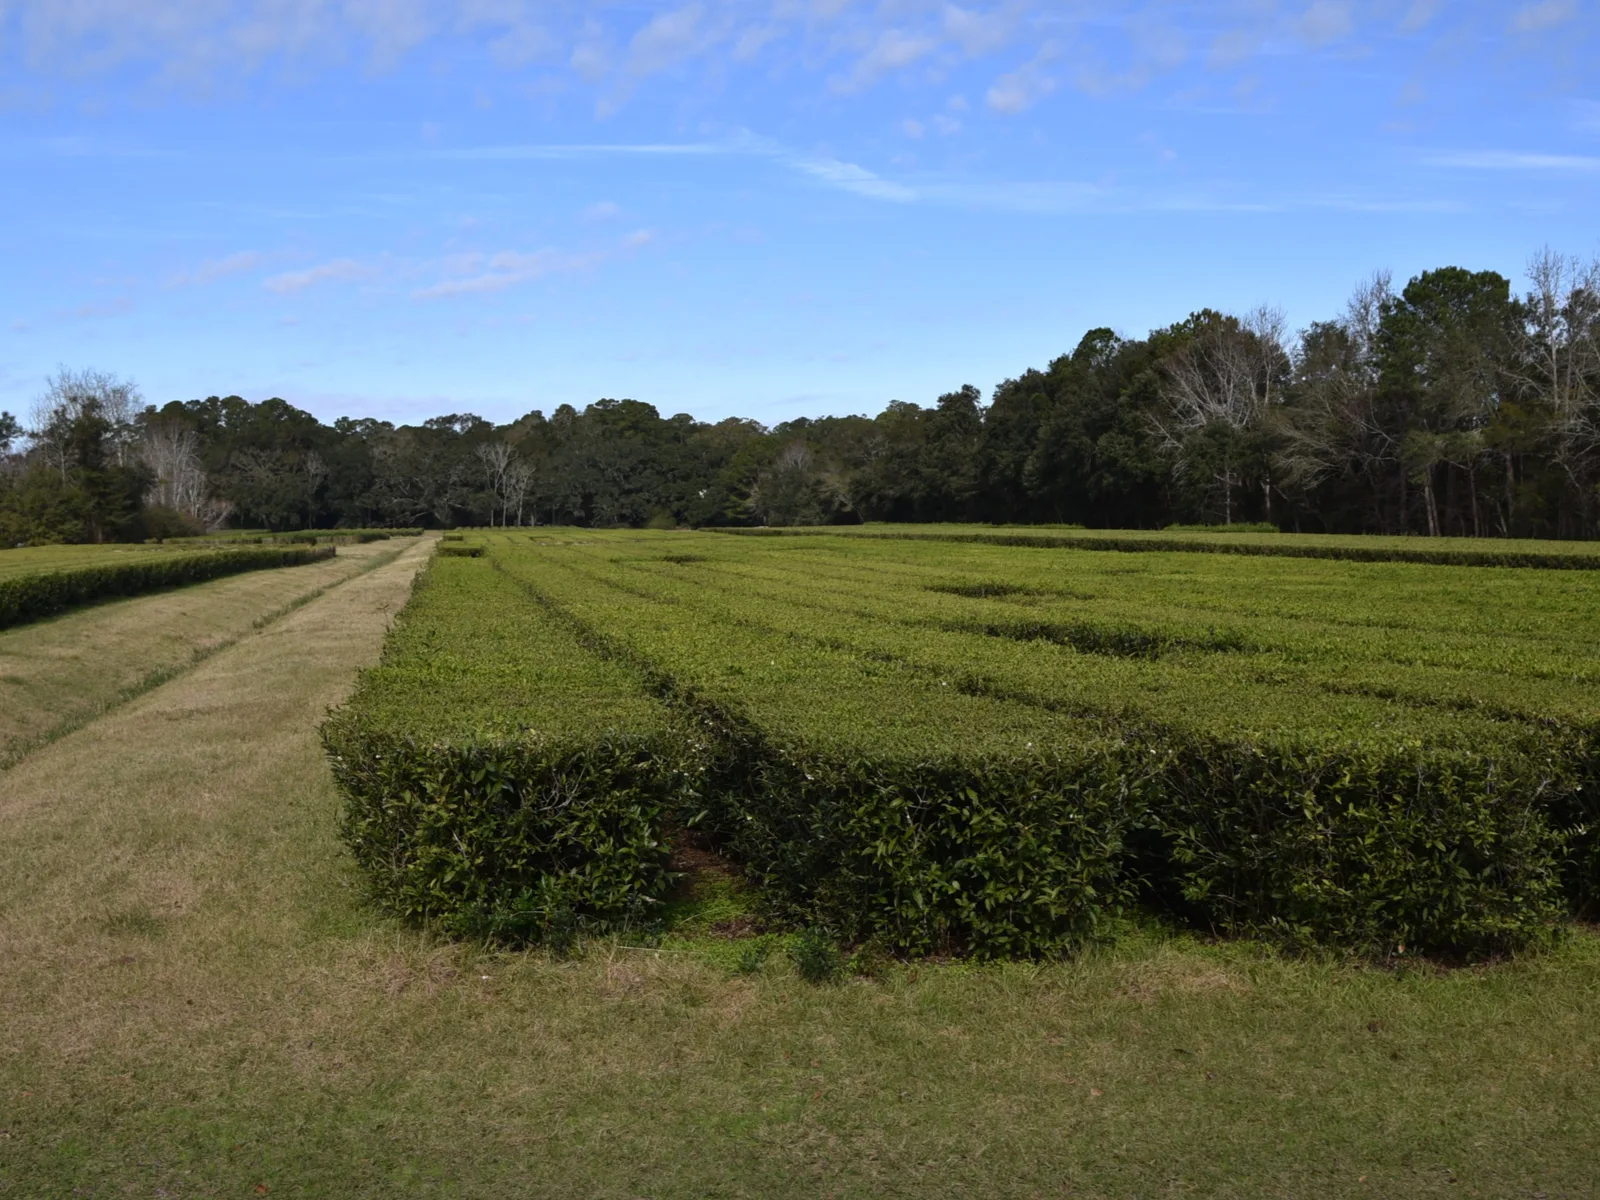 One of the best things to do in Charleston, the tea plantation